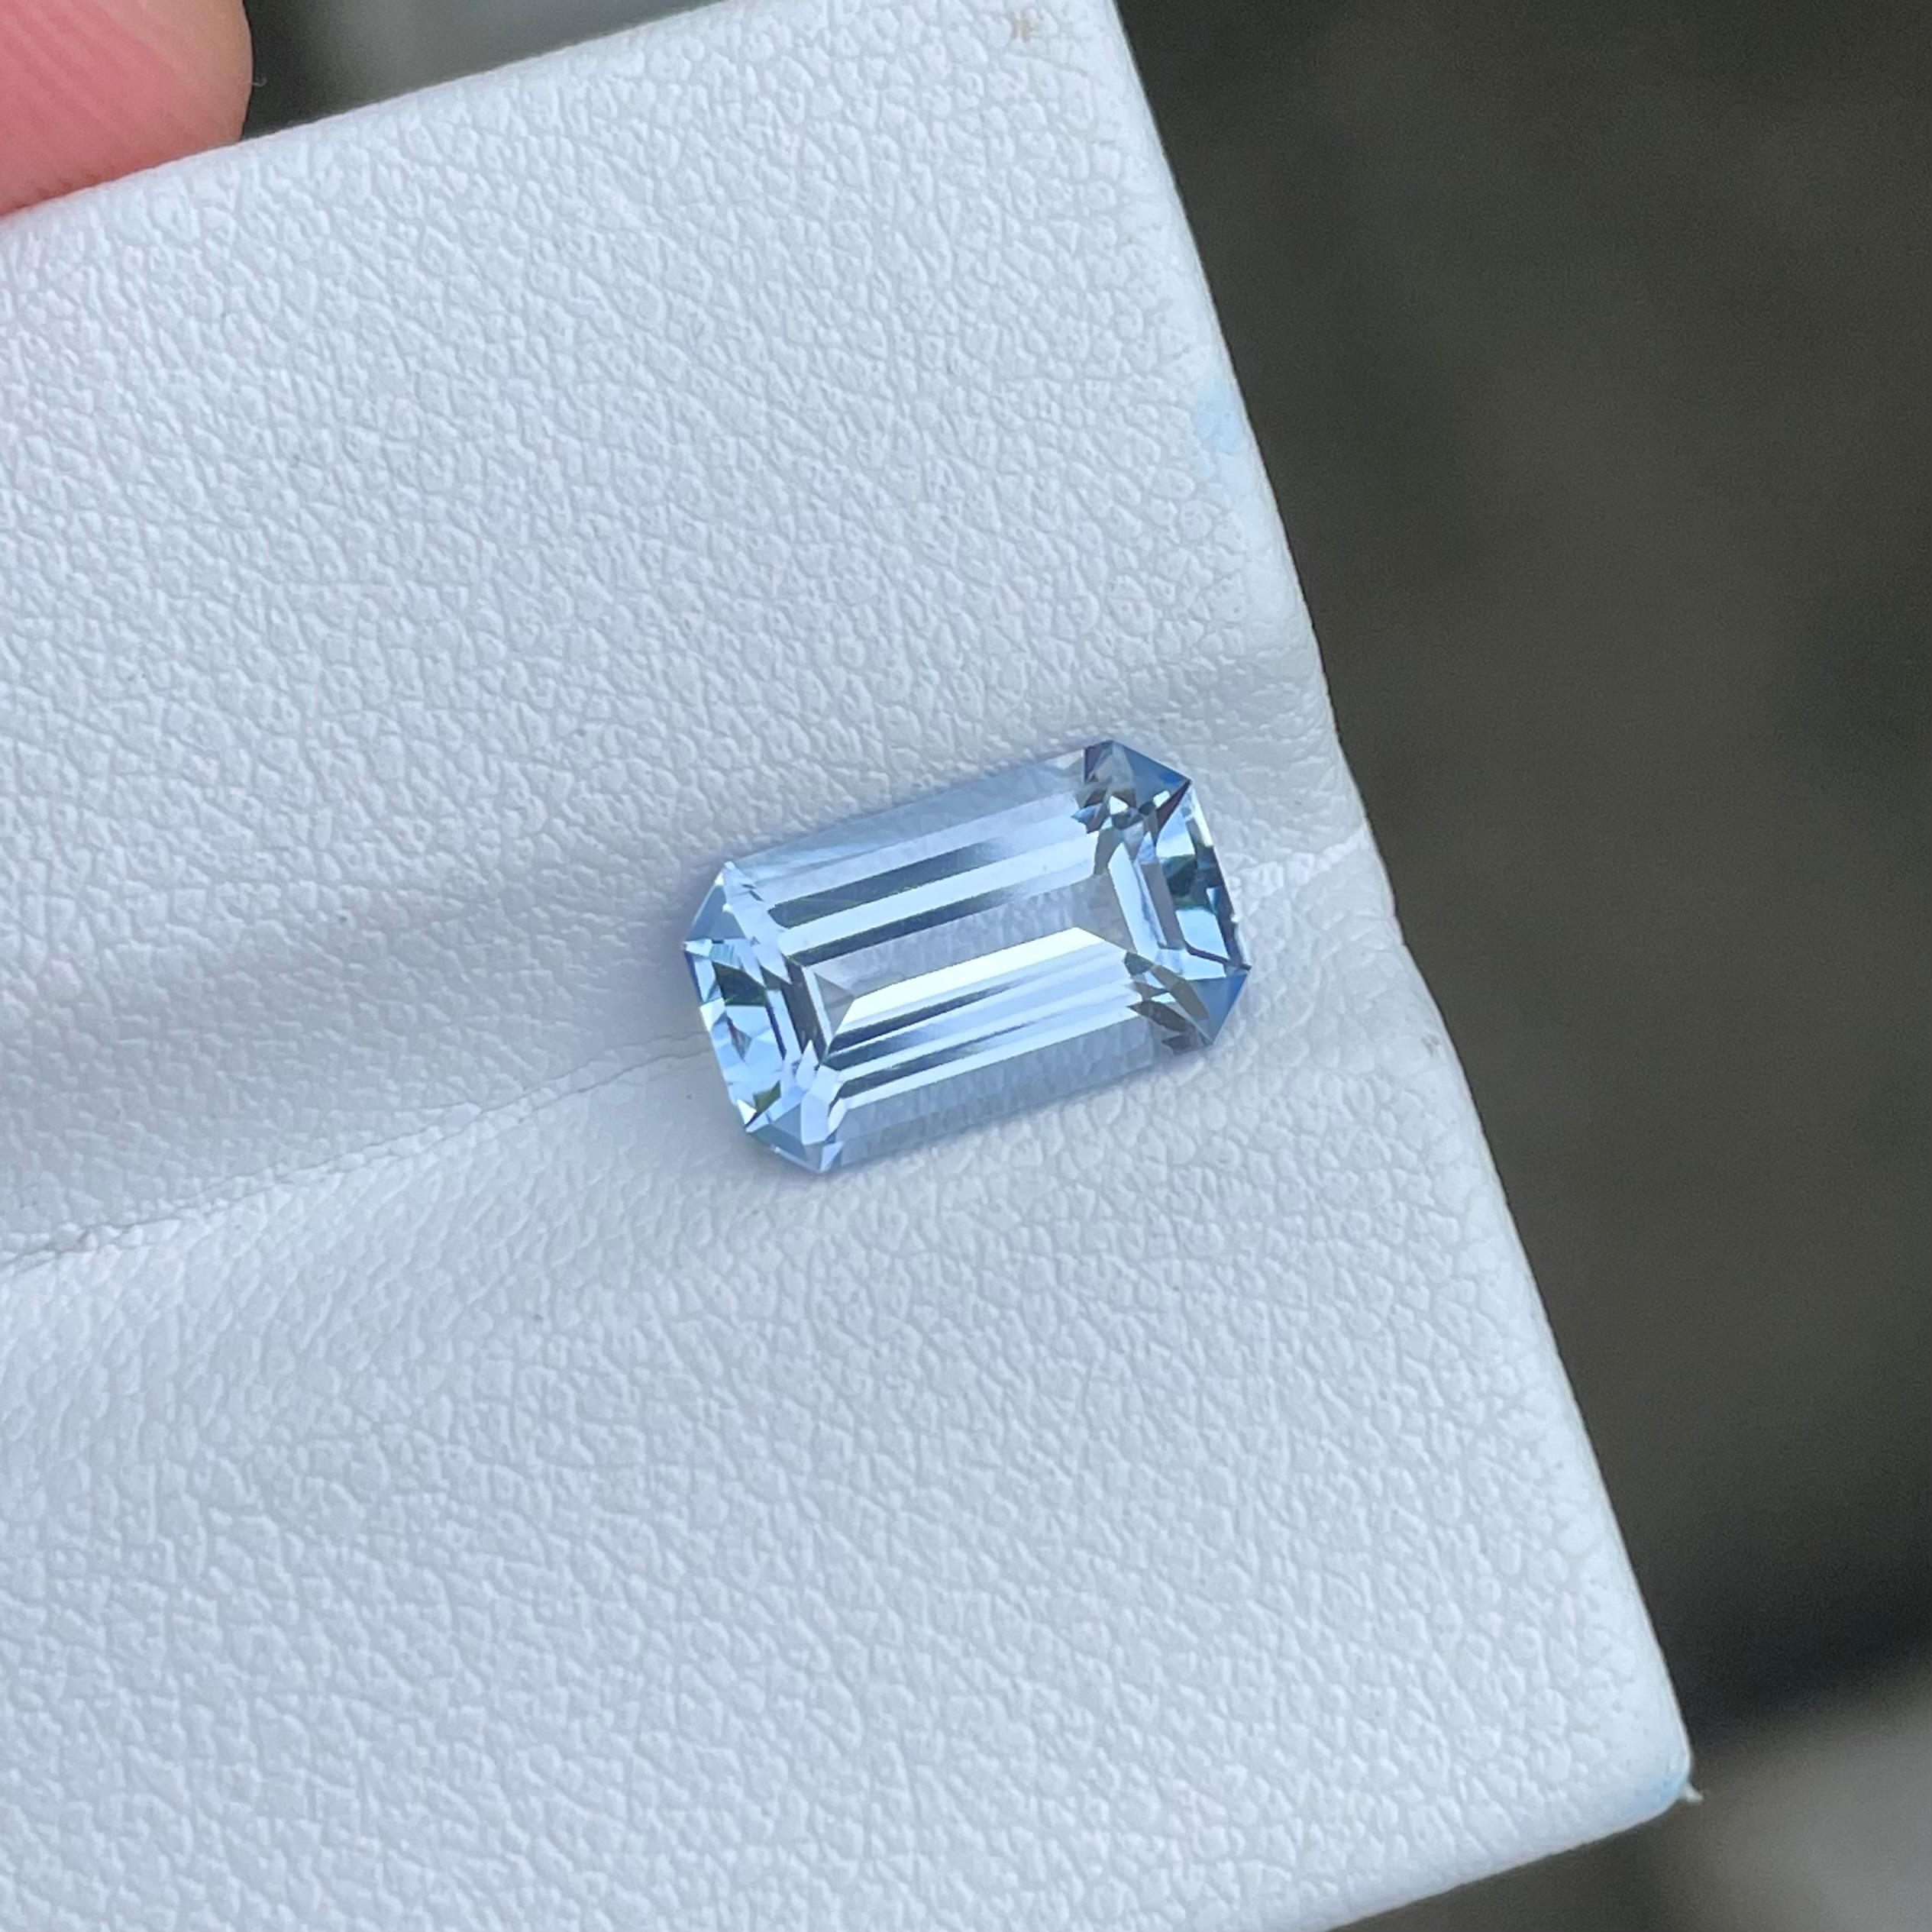 Weight 2.60 carats 
Dimensions 11.1 x 6.7 x 4.8 mm
Treatment Heated 
Origin Pakistan 
Clarity Loupe Clean
Shape Octagon 
Cut Emerald



Discover the mesmerizing allure of a natural Pakistani gemstone with our Icy-Blue Aquamarine weighing 2.60